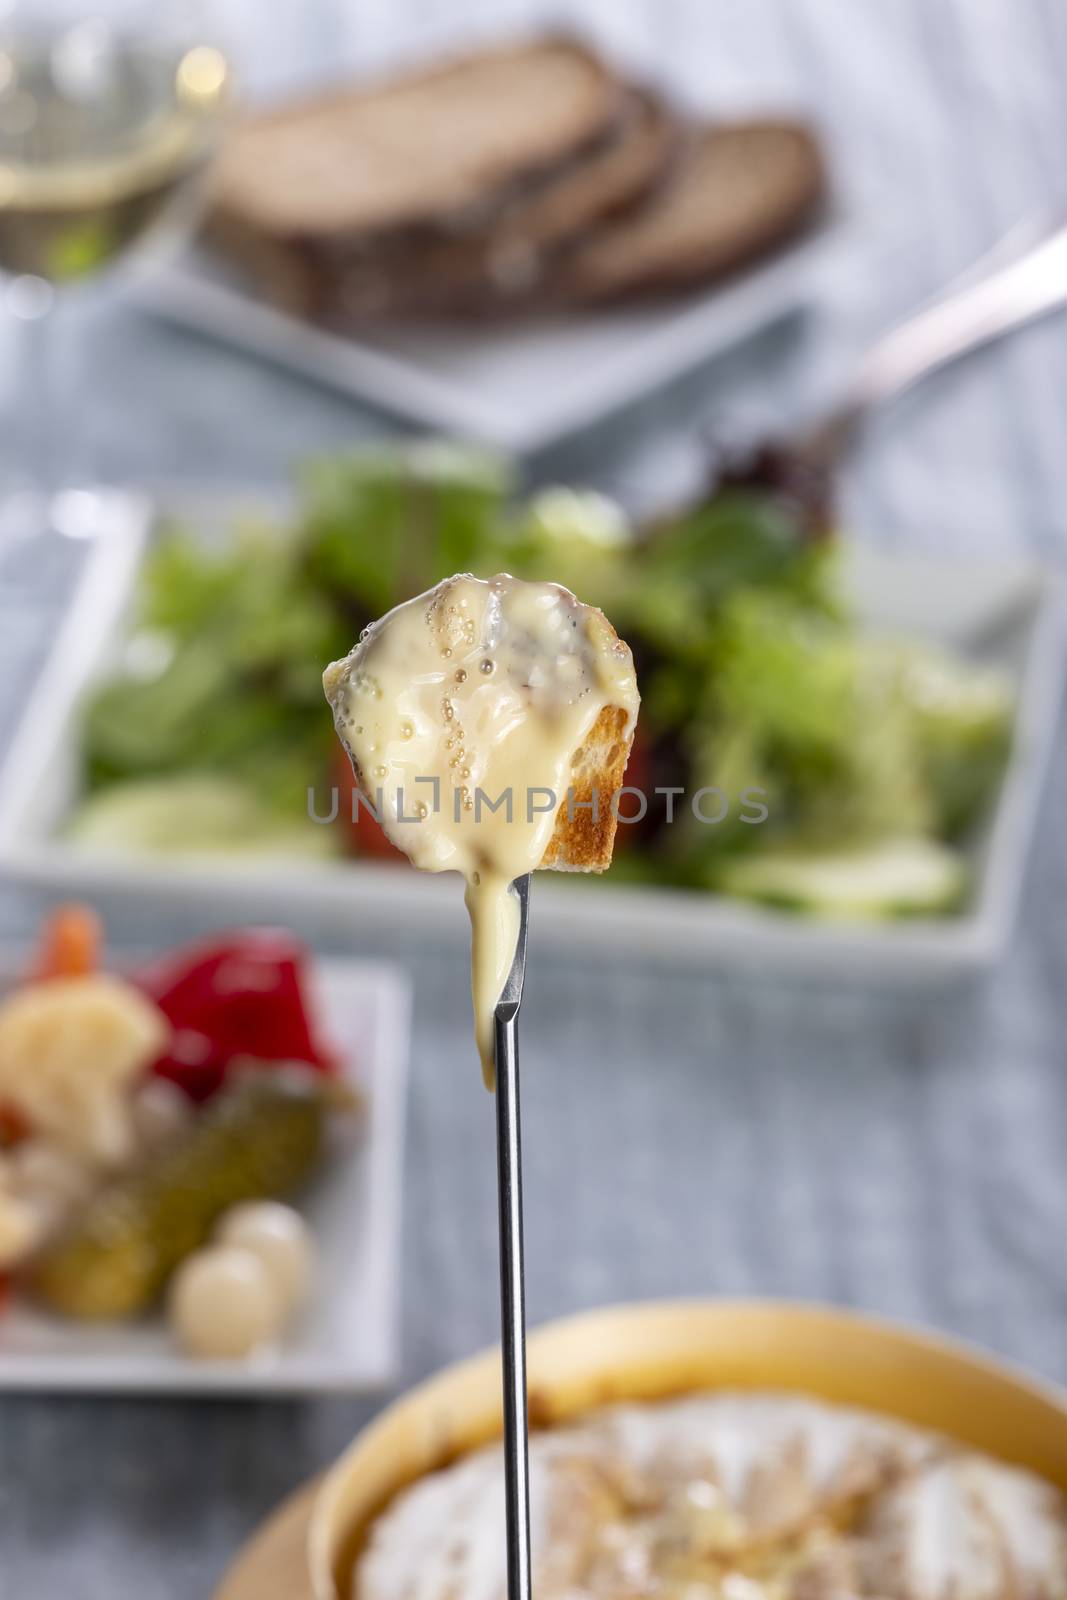 swiss cheese fondue with bread by bernjuer